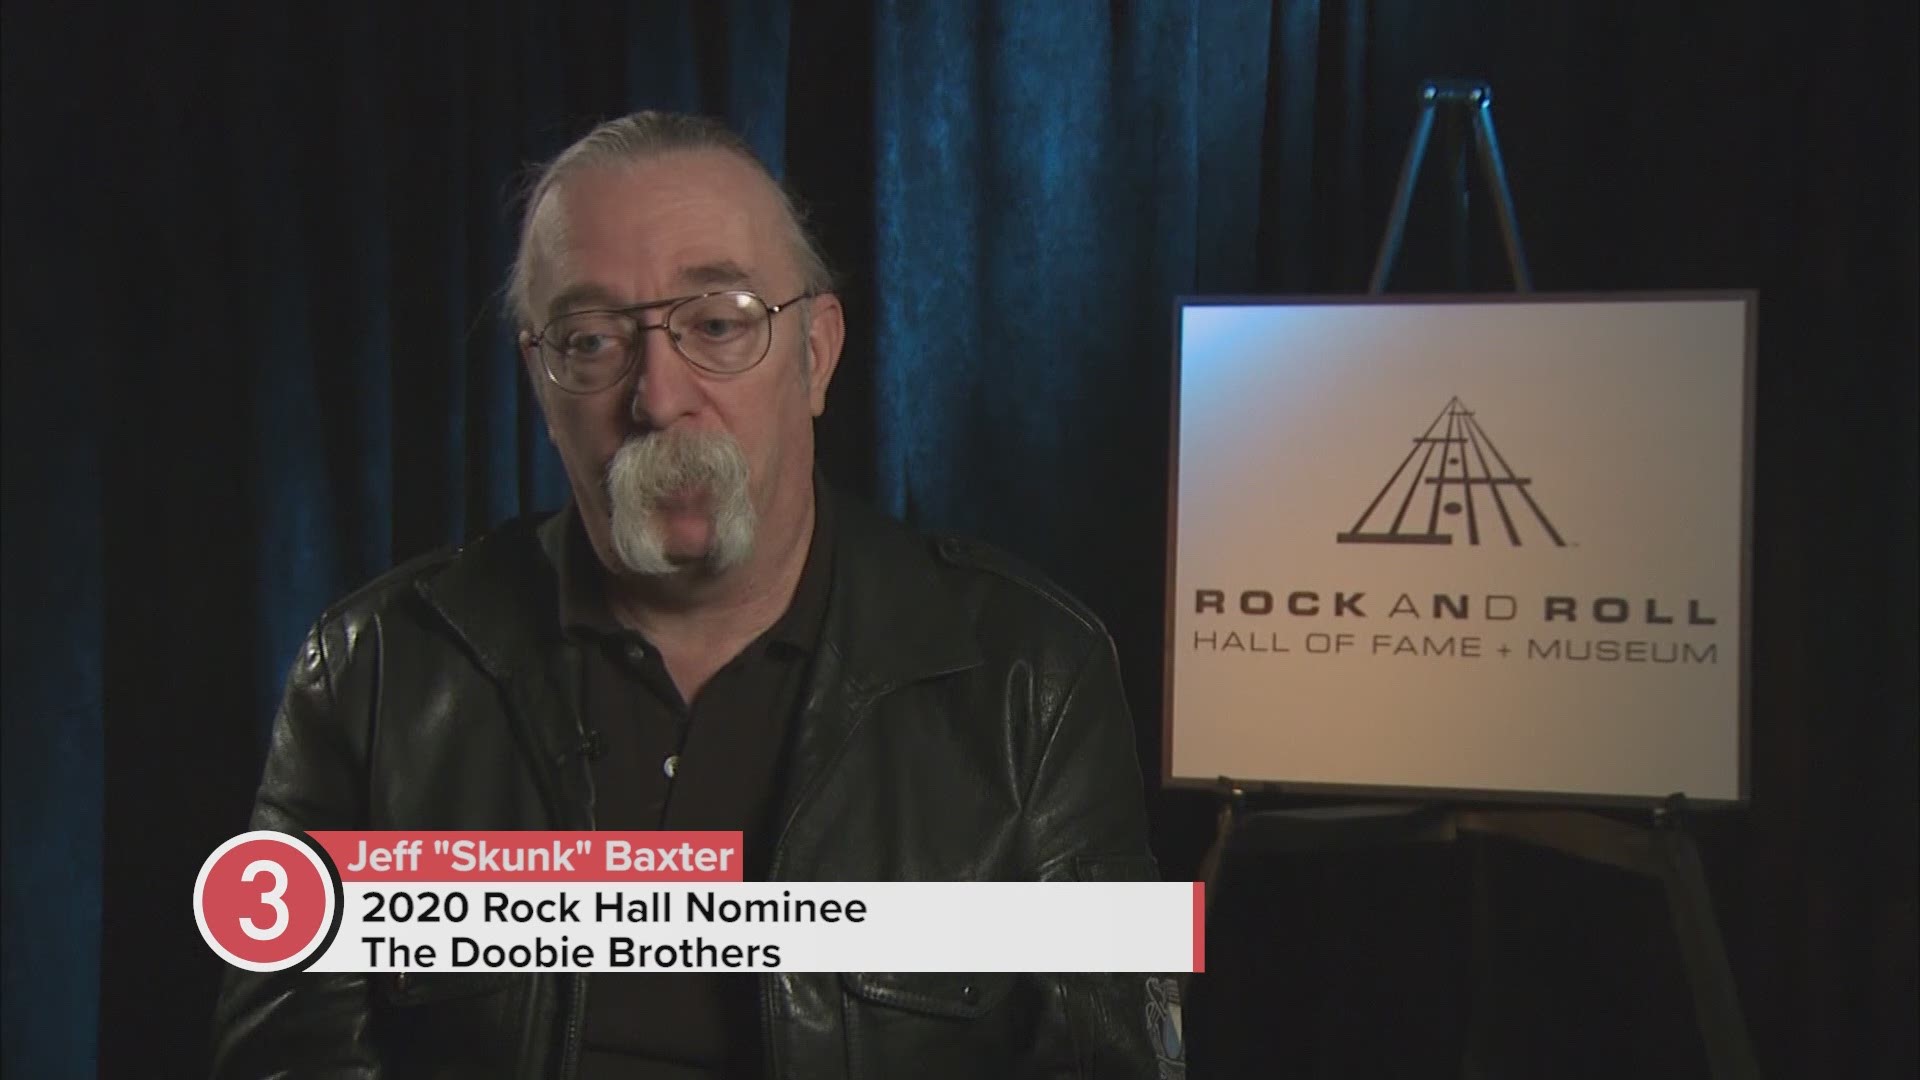 Watch our 2008 interview with the 2020 Rock and Roll Hall of Fame nominee